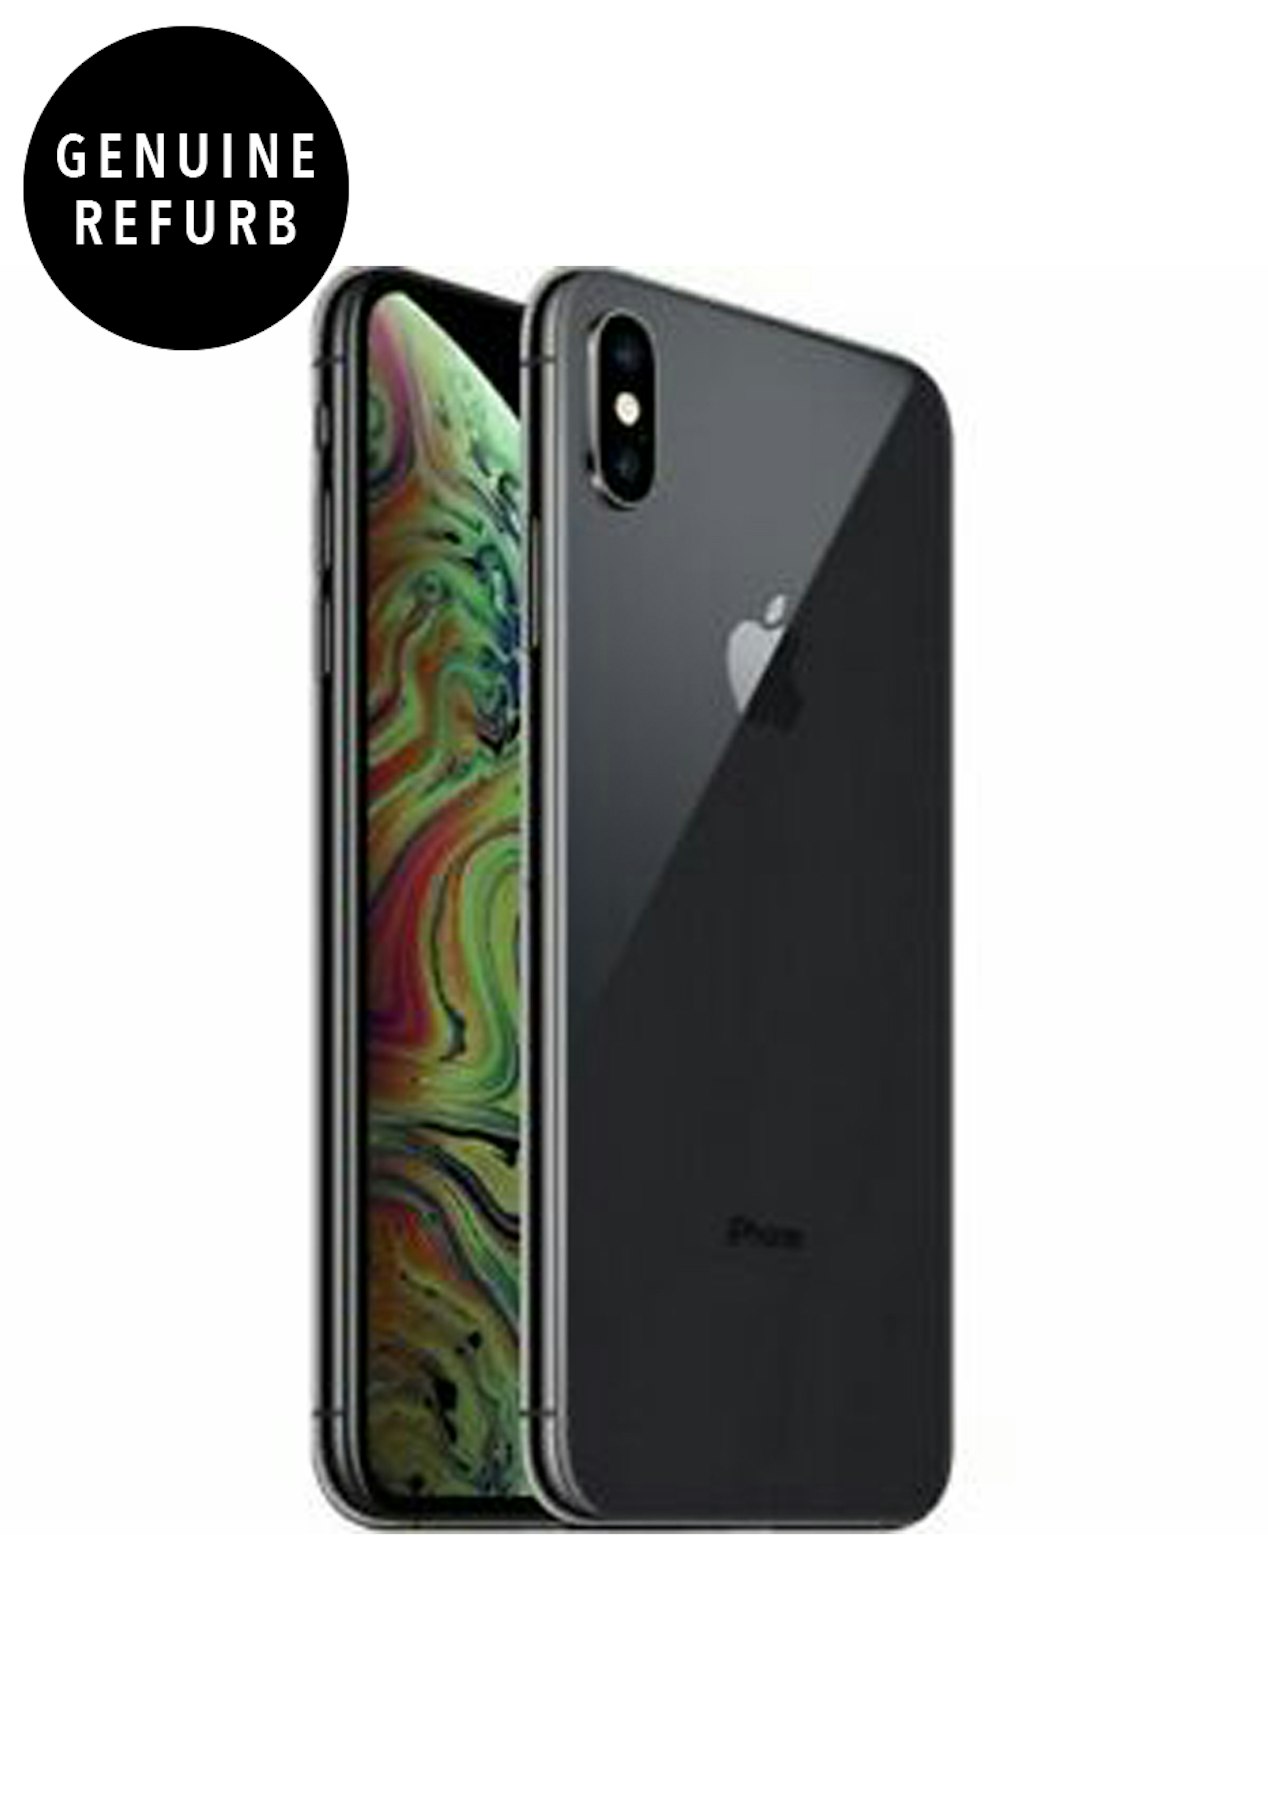 Apple iPhone XS 64GB Black - Refurbished with 1 Year Warranty - Onceit